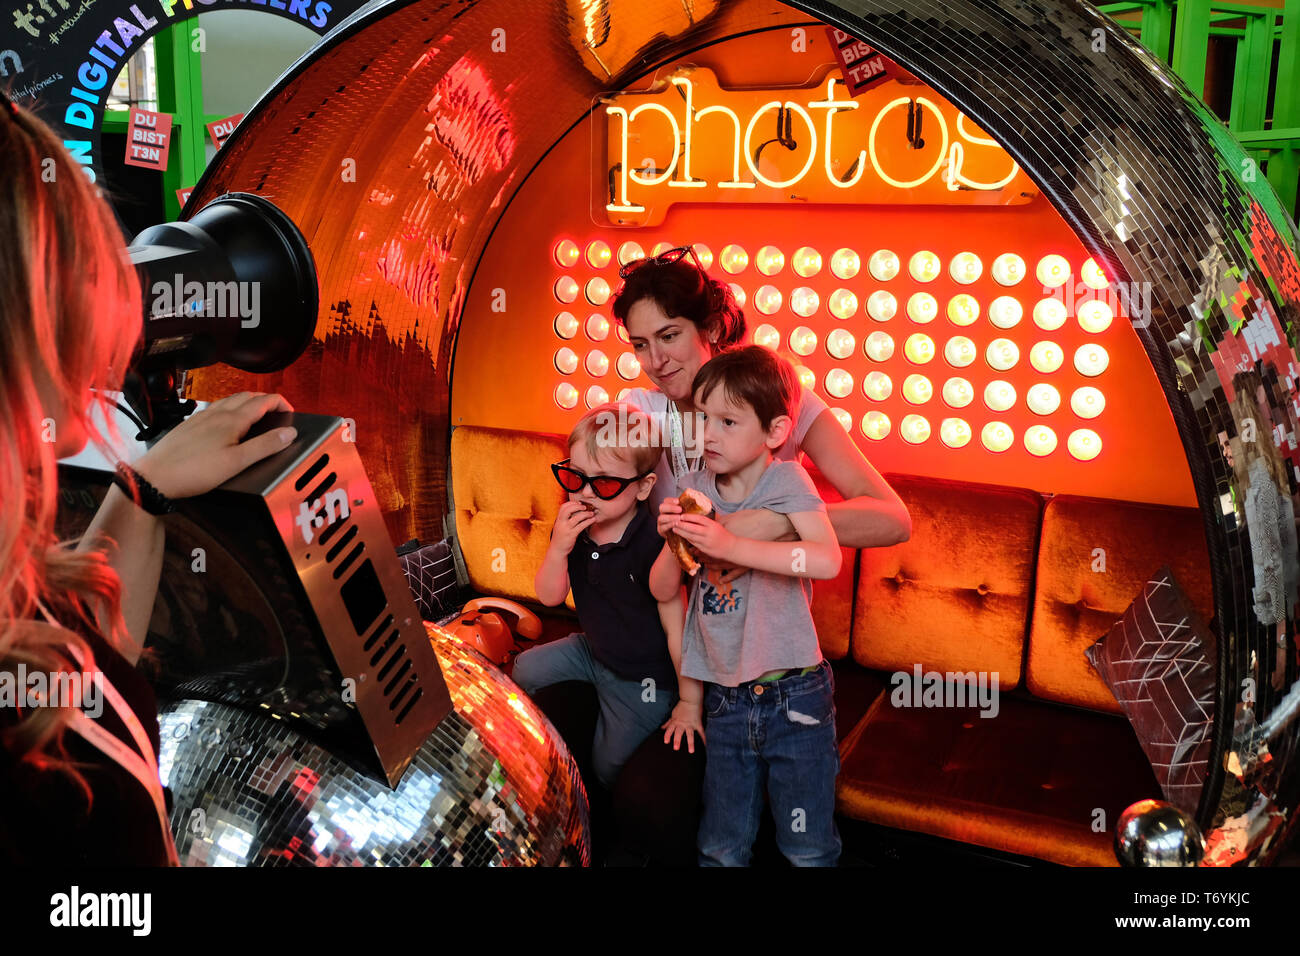 Berlin, Germany - May 3, 2018: Employee of the t3n computer magazin takes a promo photo at their booth of a visitor family. re:publica is a conference Stock Photo